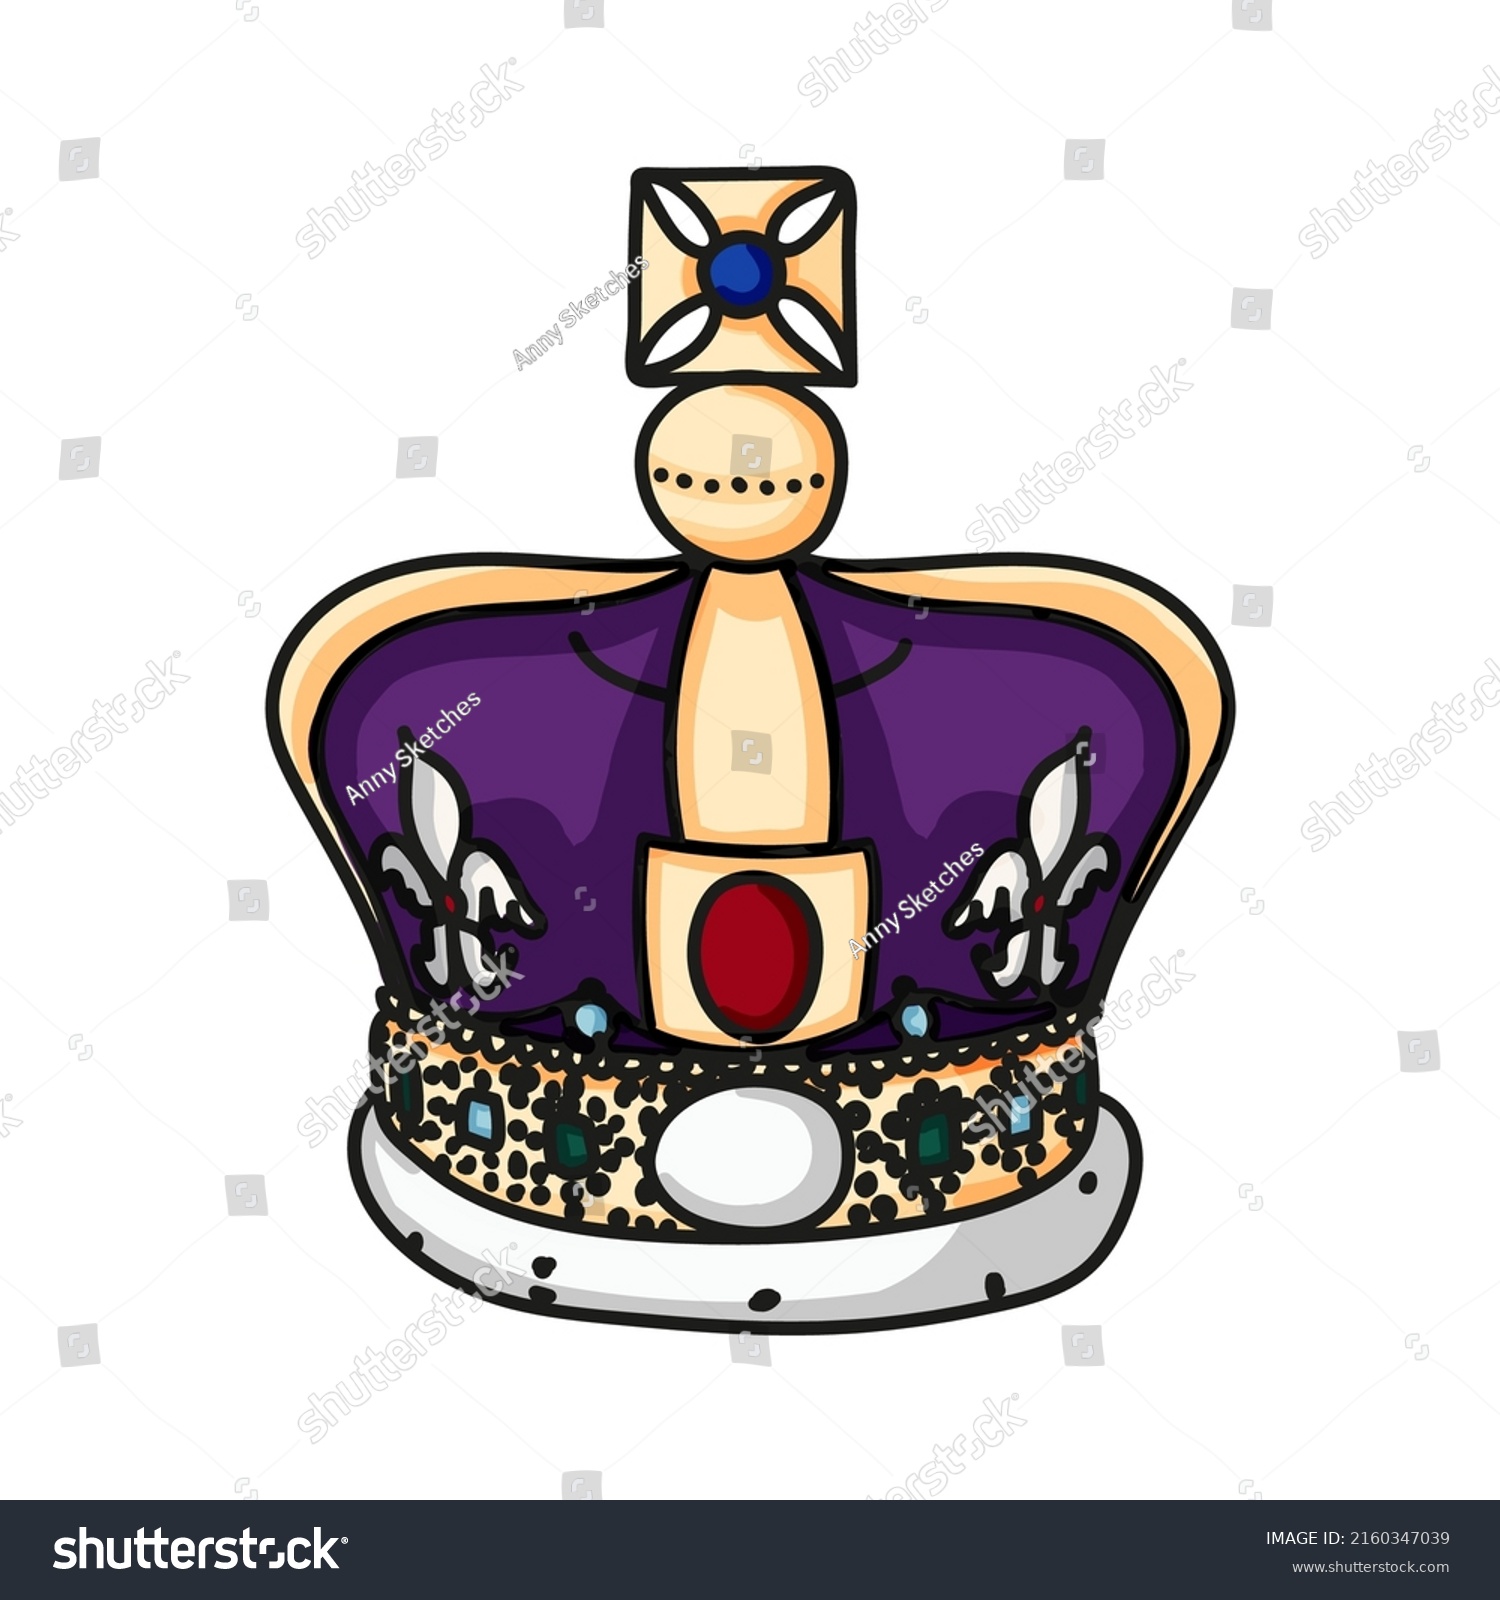 SVG of The Queen's Platinum Jubilee crown celebration poster with silhouette of Queen Elizabeth. Vector illustration for Her Majesty The Queen on her 70 years of service from 1952 to 2022 svg